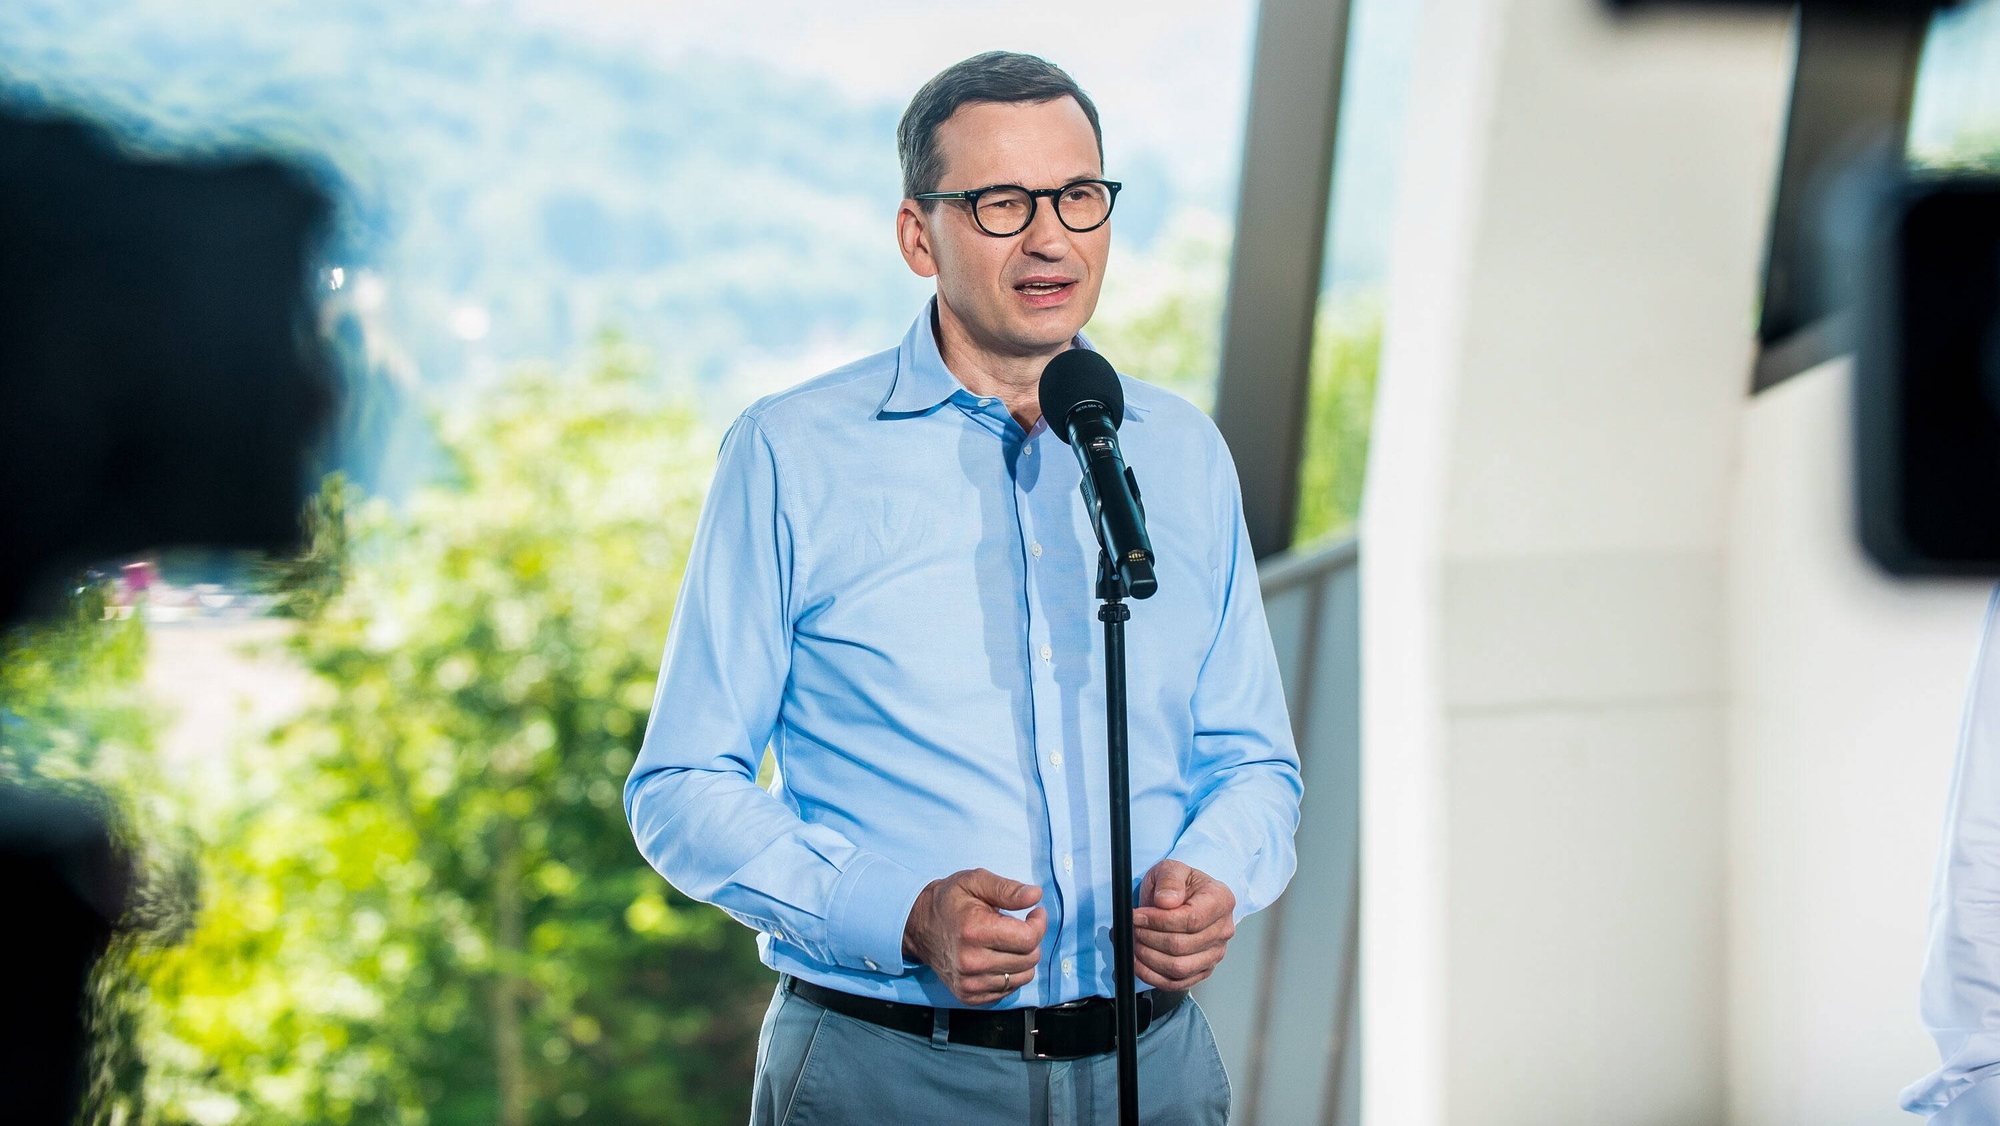 epa10046099 Polish Prime Minister Mateusz Morawiecki speaks during the opening of the gondola lift in Solina, Poland, 01 July 2022. The length of the cable railway is 1600 meters, from the Plasza station to the Jawor station, where the observation tower and the theme park are situated.  EPA/Art Service 2 POLAND OUT